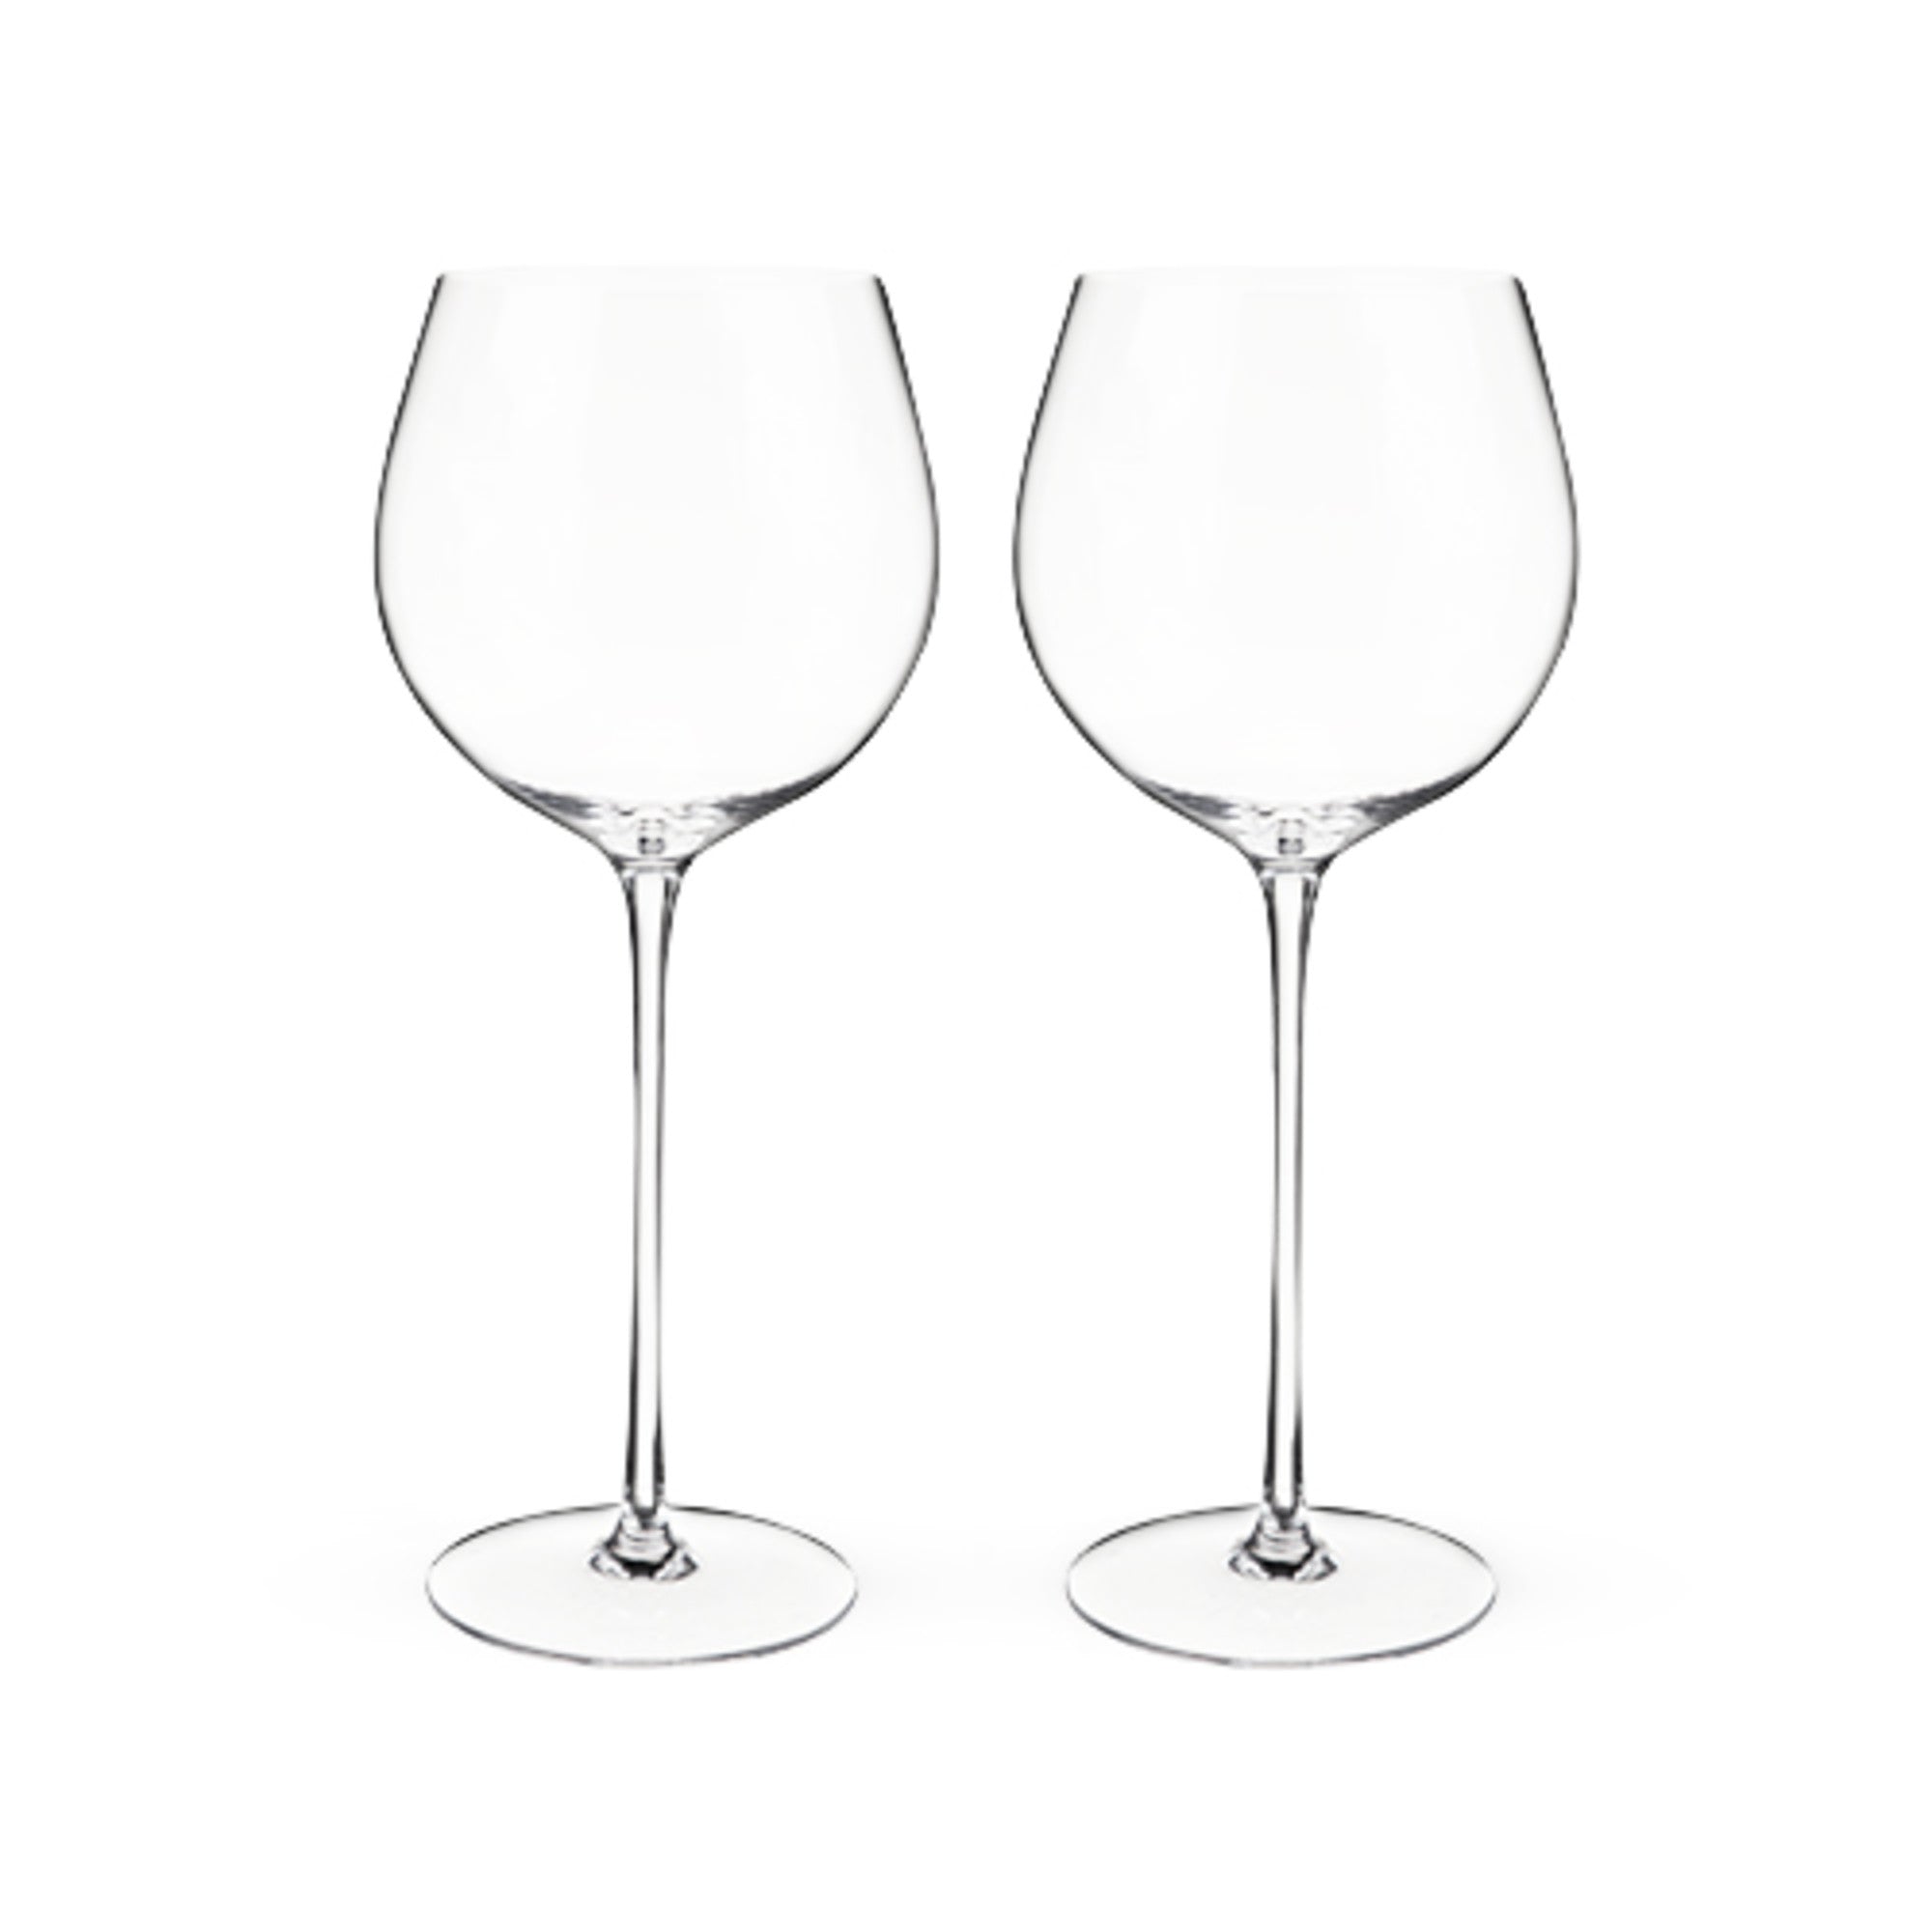 Linger Crystal Red Wine Glass Set by Twine Living® (10754) Drinkware Twine